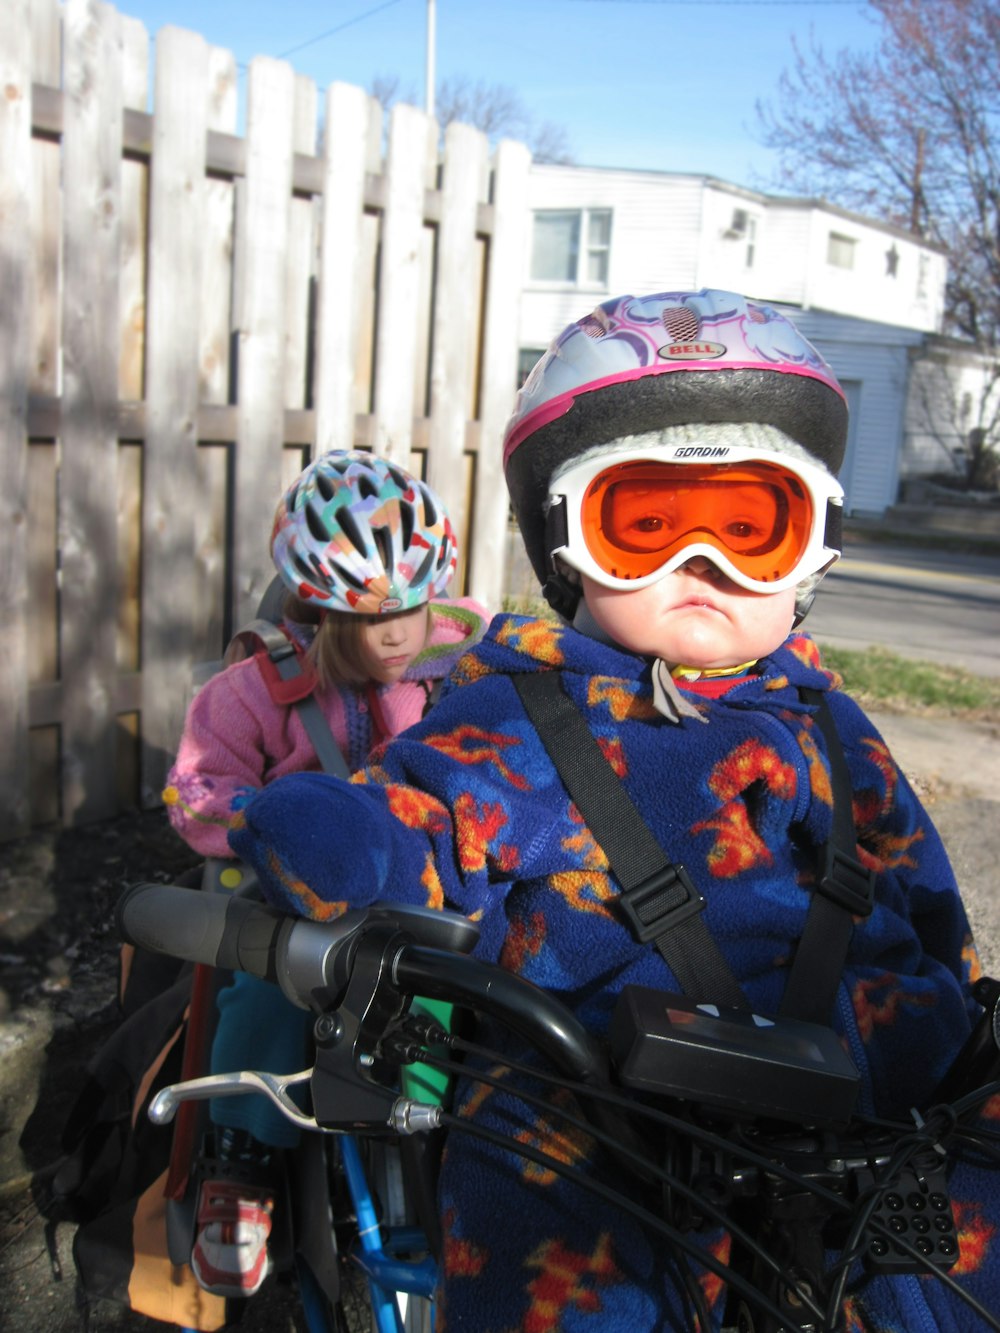 boy in blue and black jacket wearing orange goggles riding on black and red bicycle